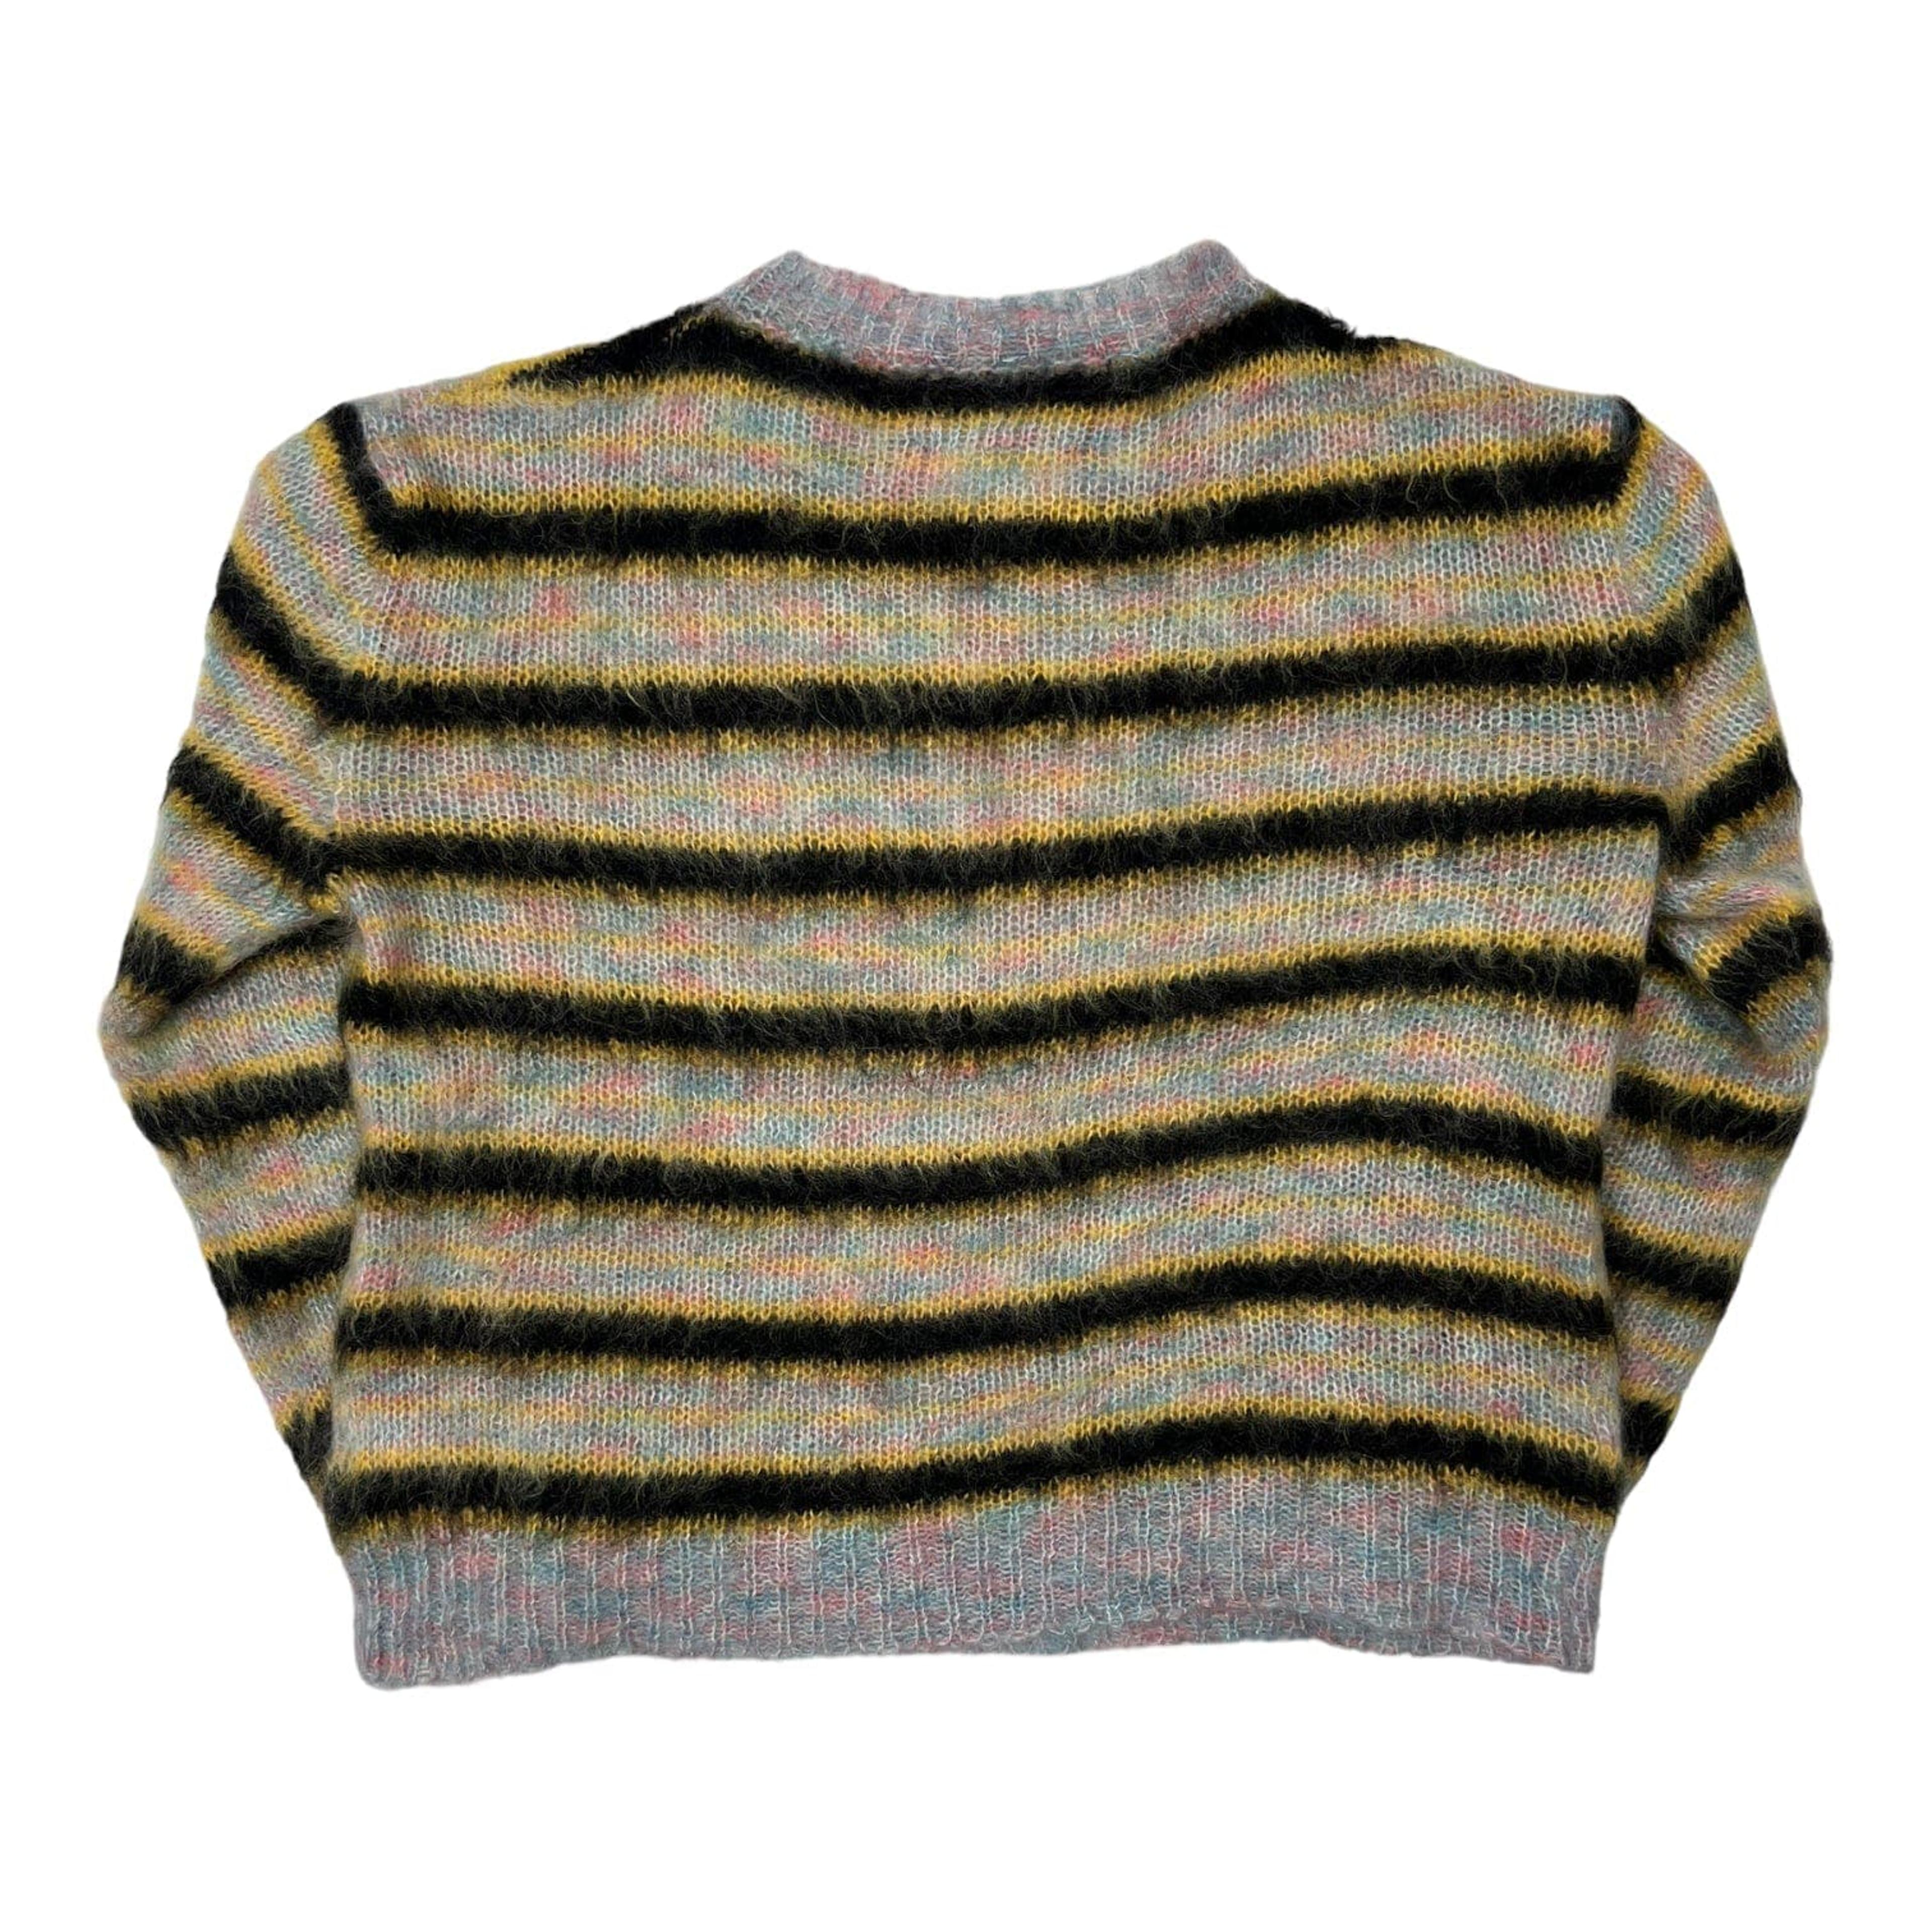 Alternate View 1 of Marni Striped Brushed Mohair Sweater Multicolor Pre-Owned